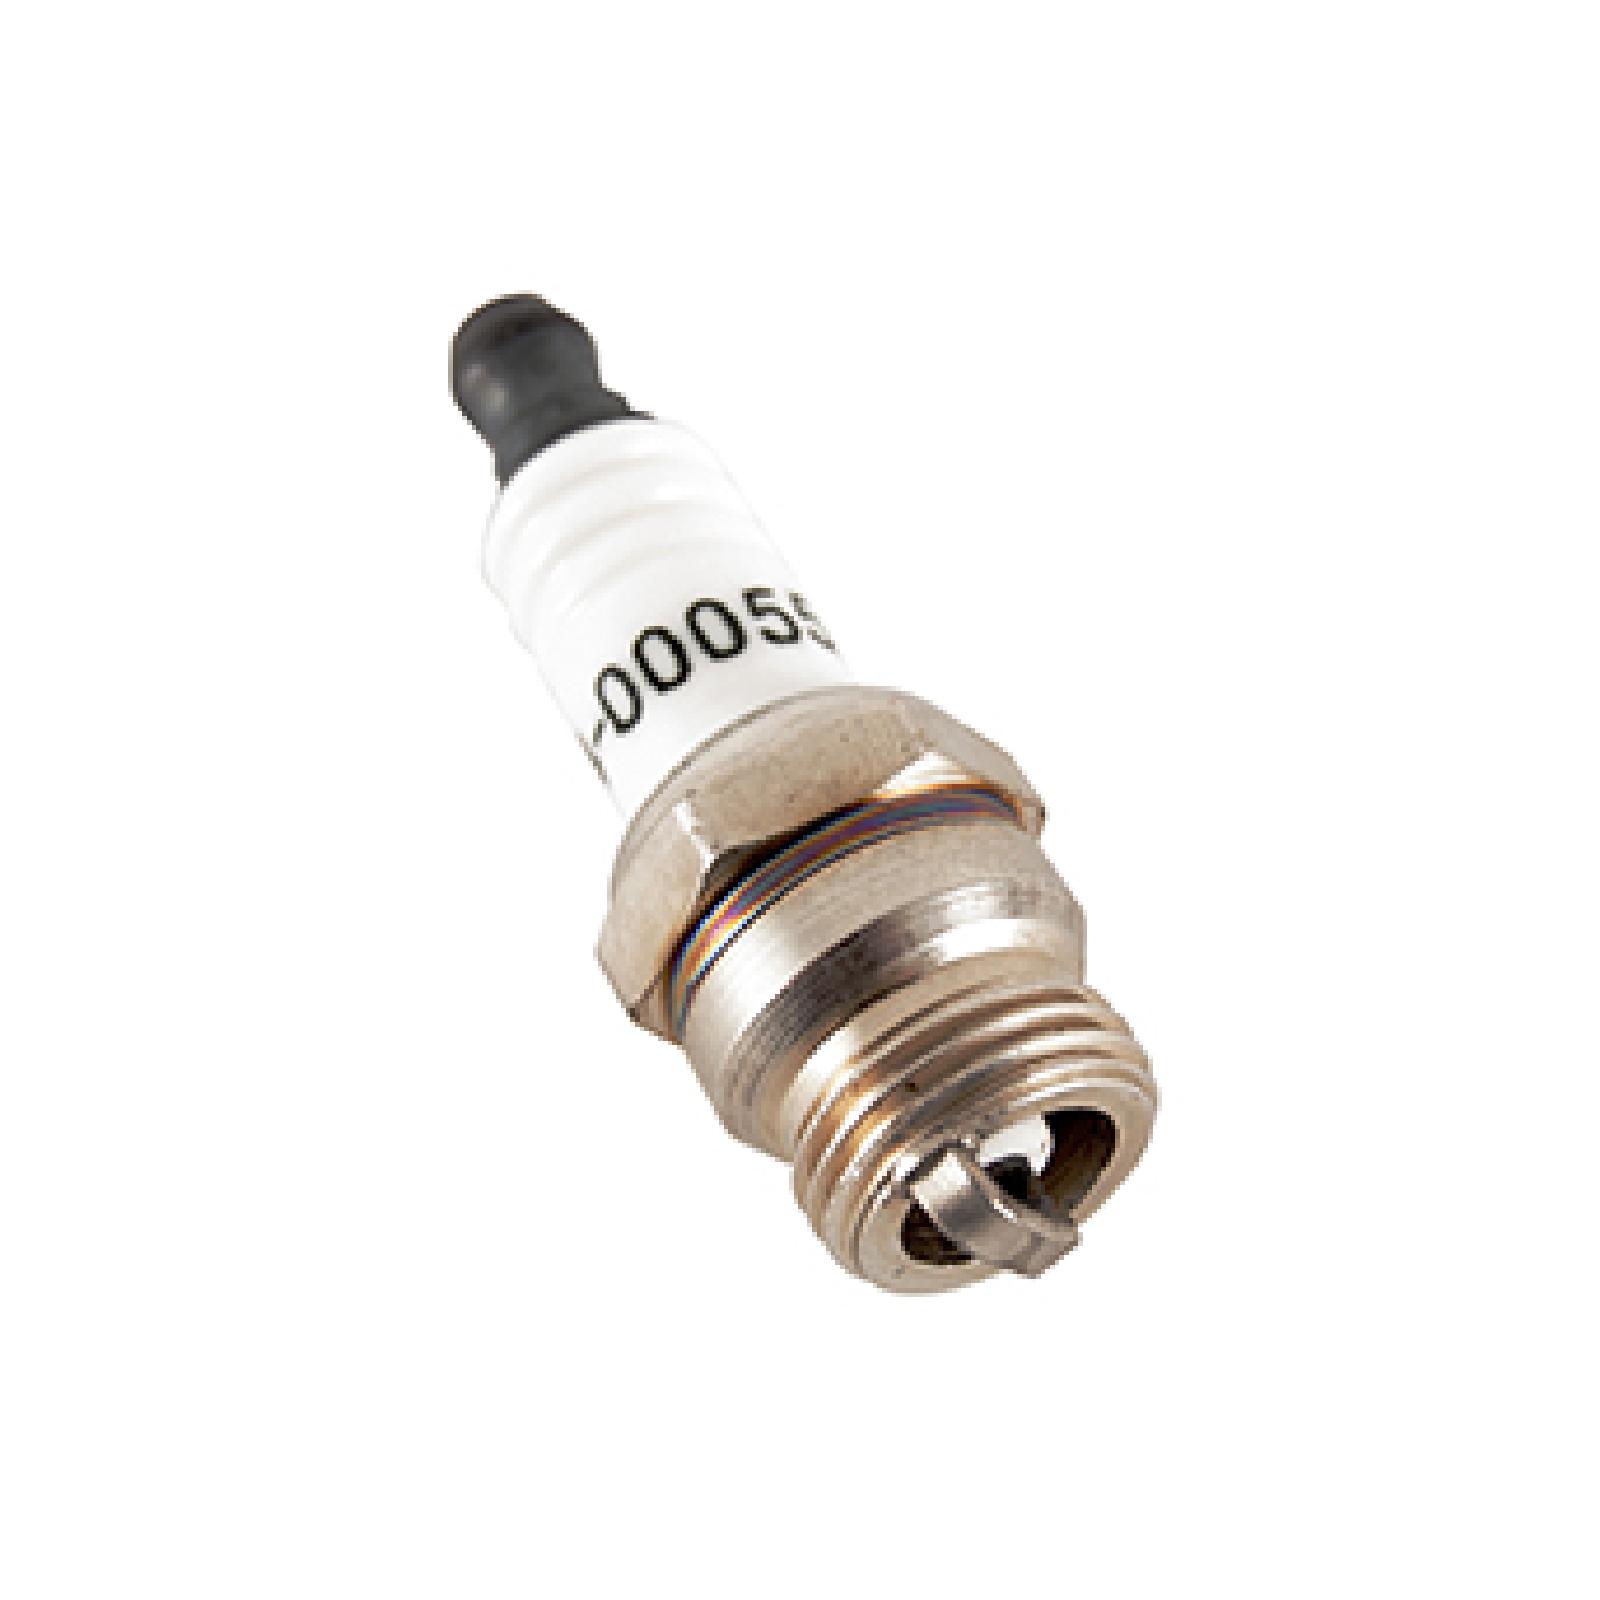 SPARK PLUG TO part# 753-06847 by MTD